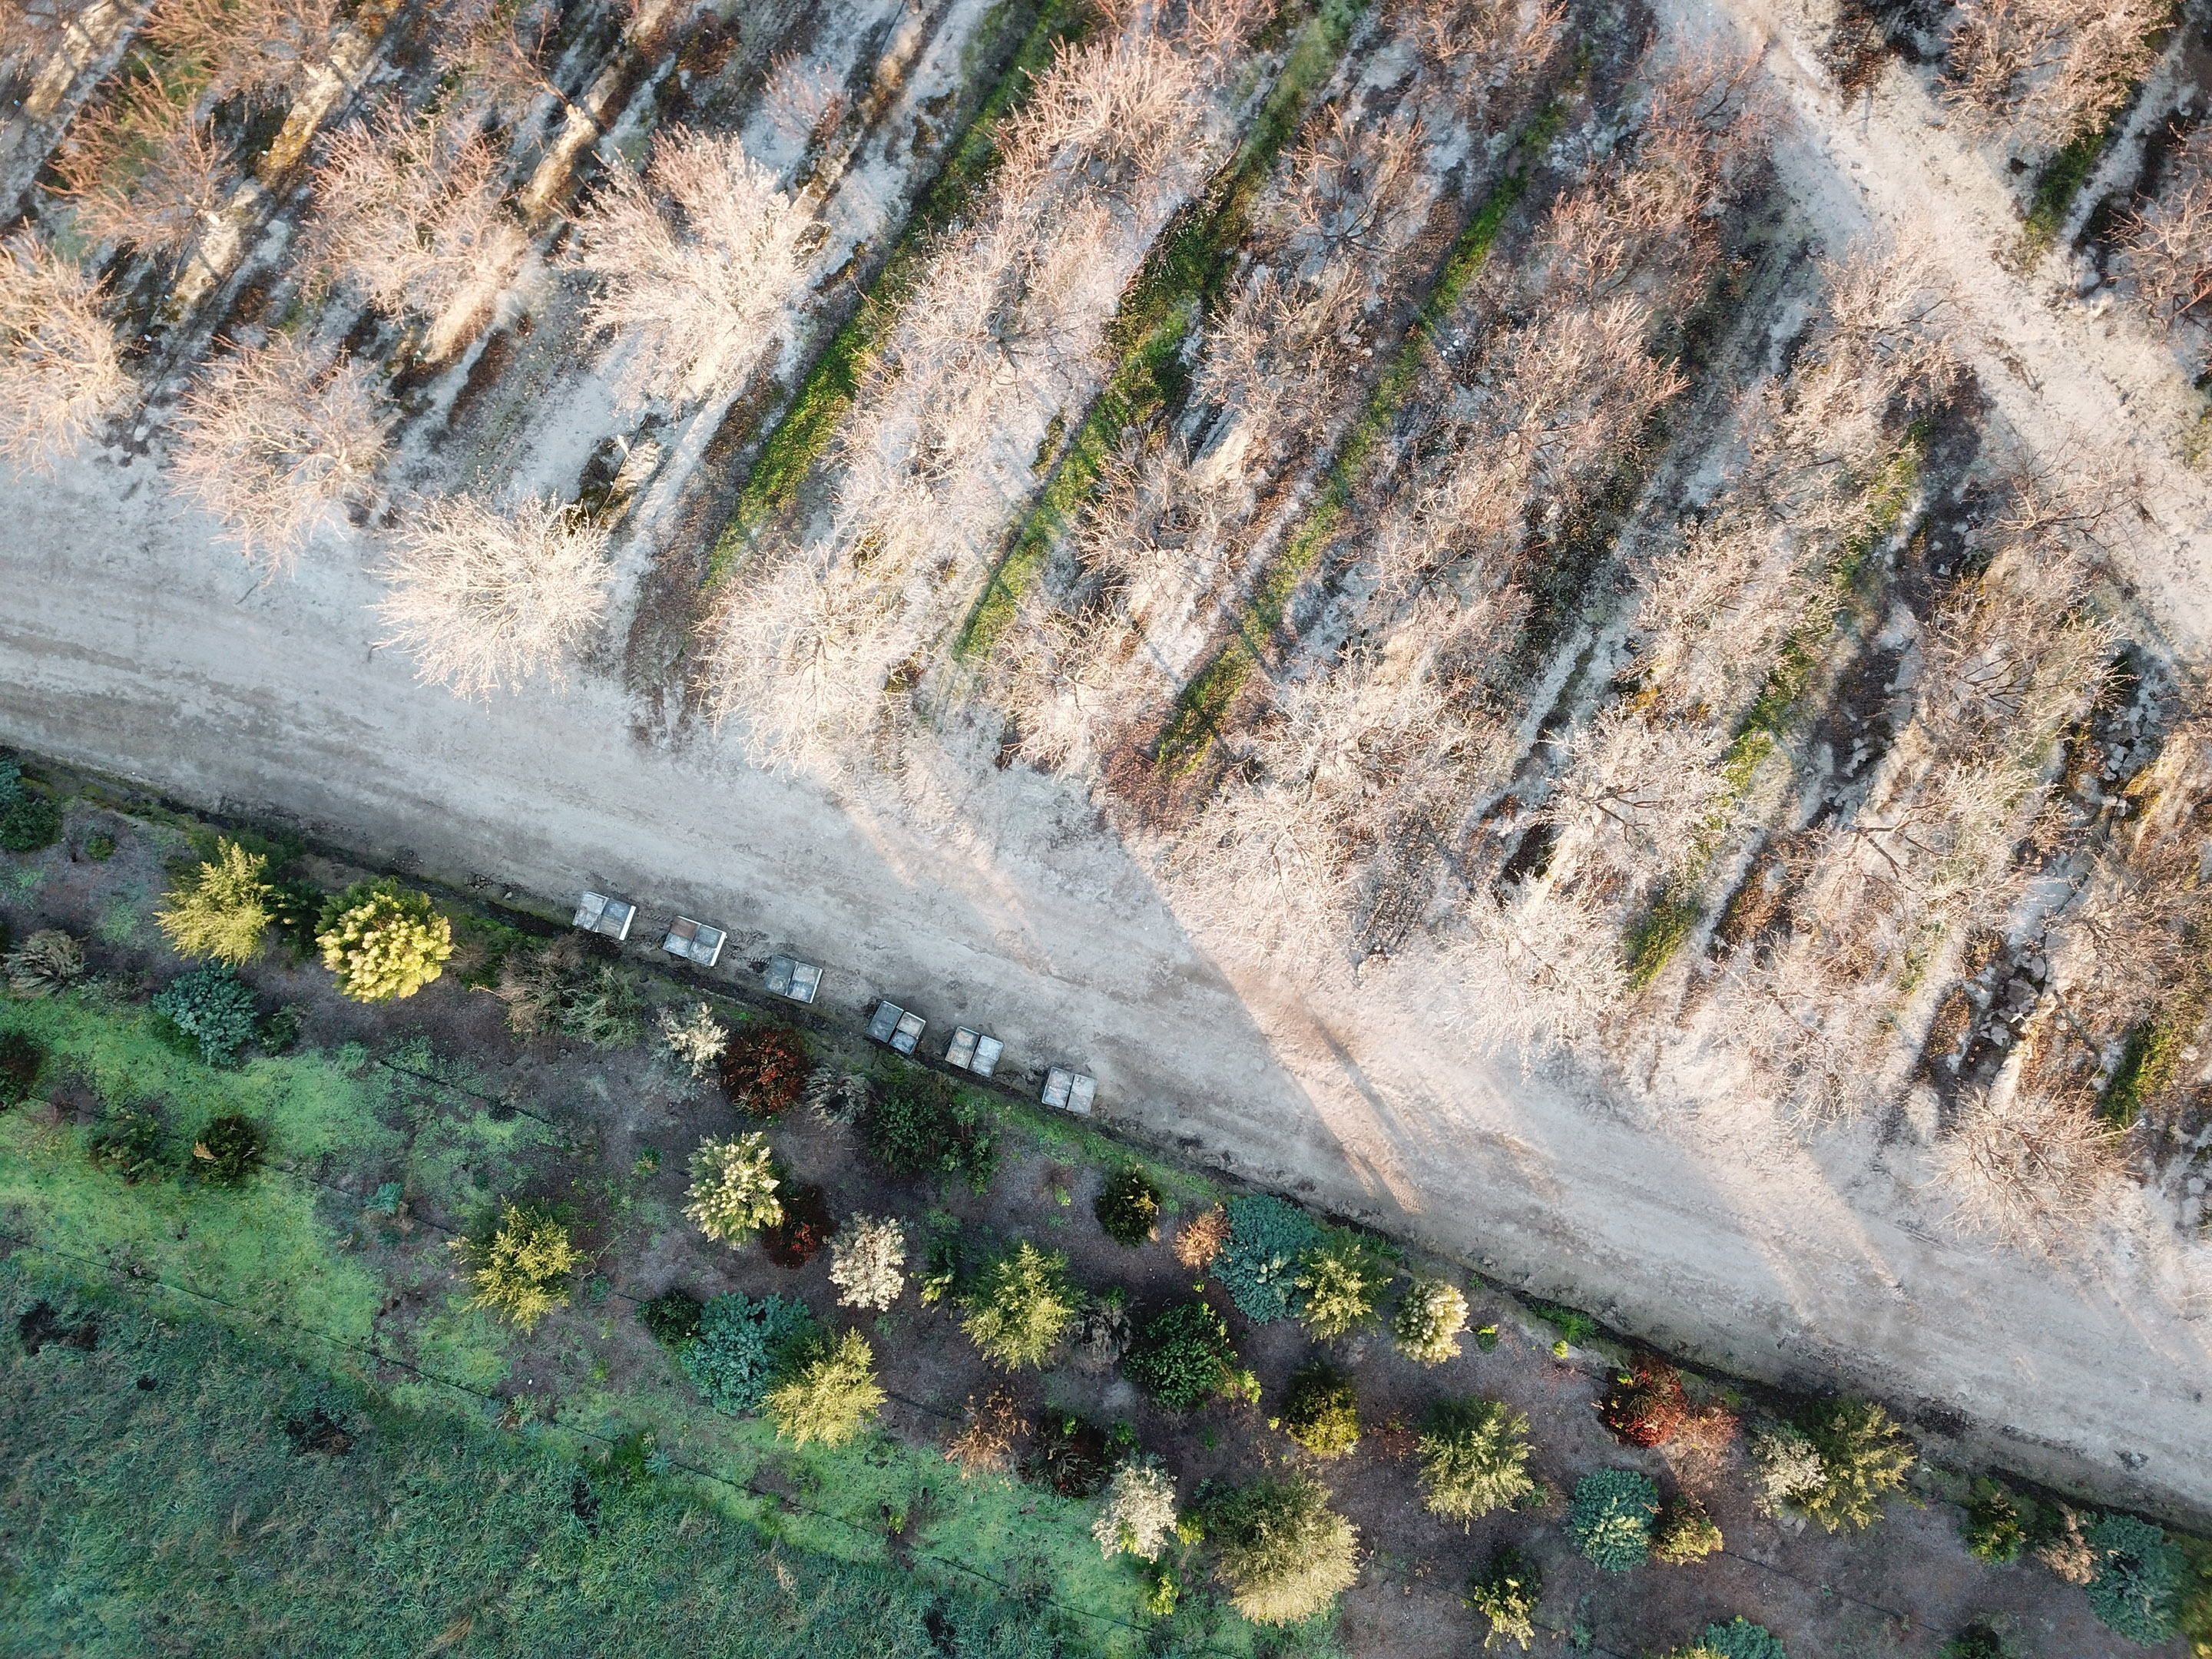 An aerial view looking down on an almond orchard. At the bottom of the photo, the greenery of the hedgerow planted as habitat for bees contrasts with the straight rows of almond trees above.